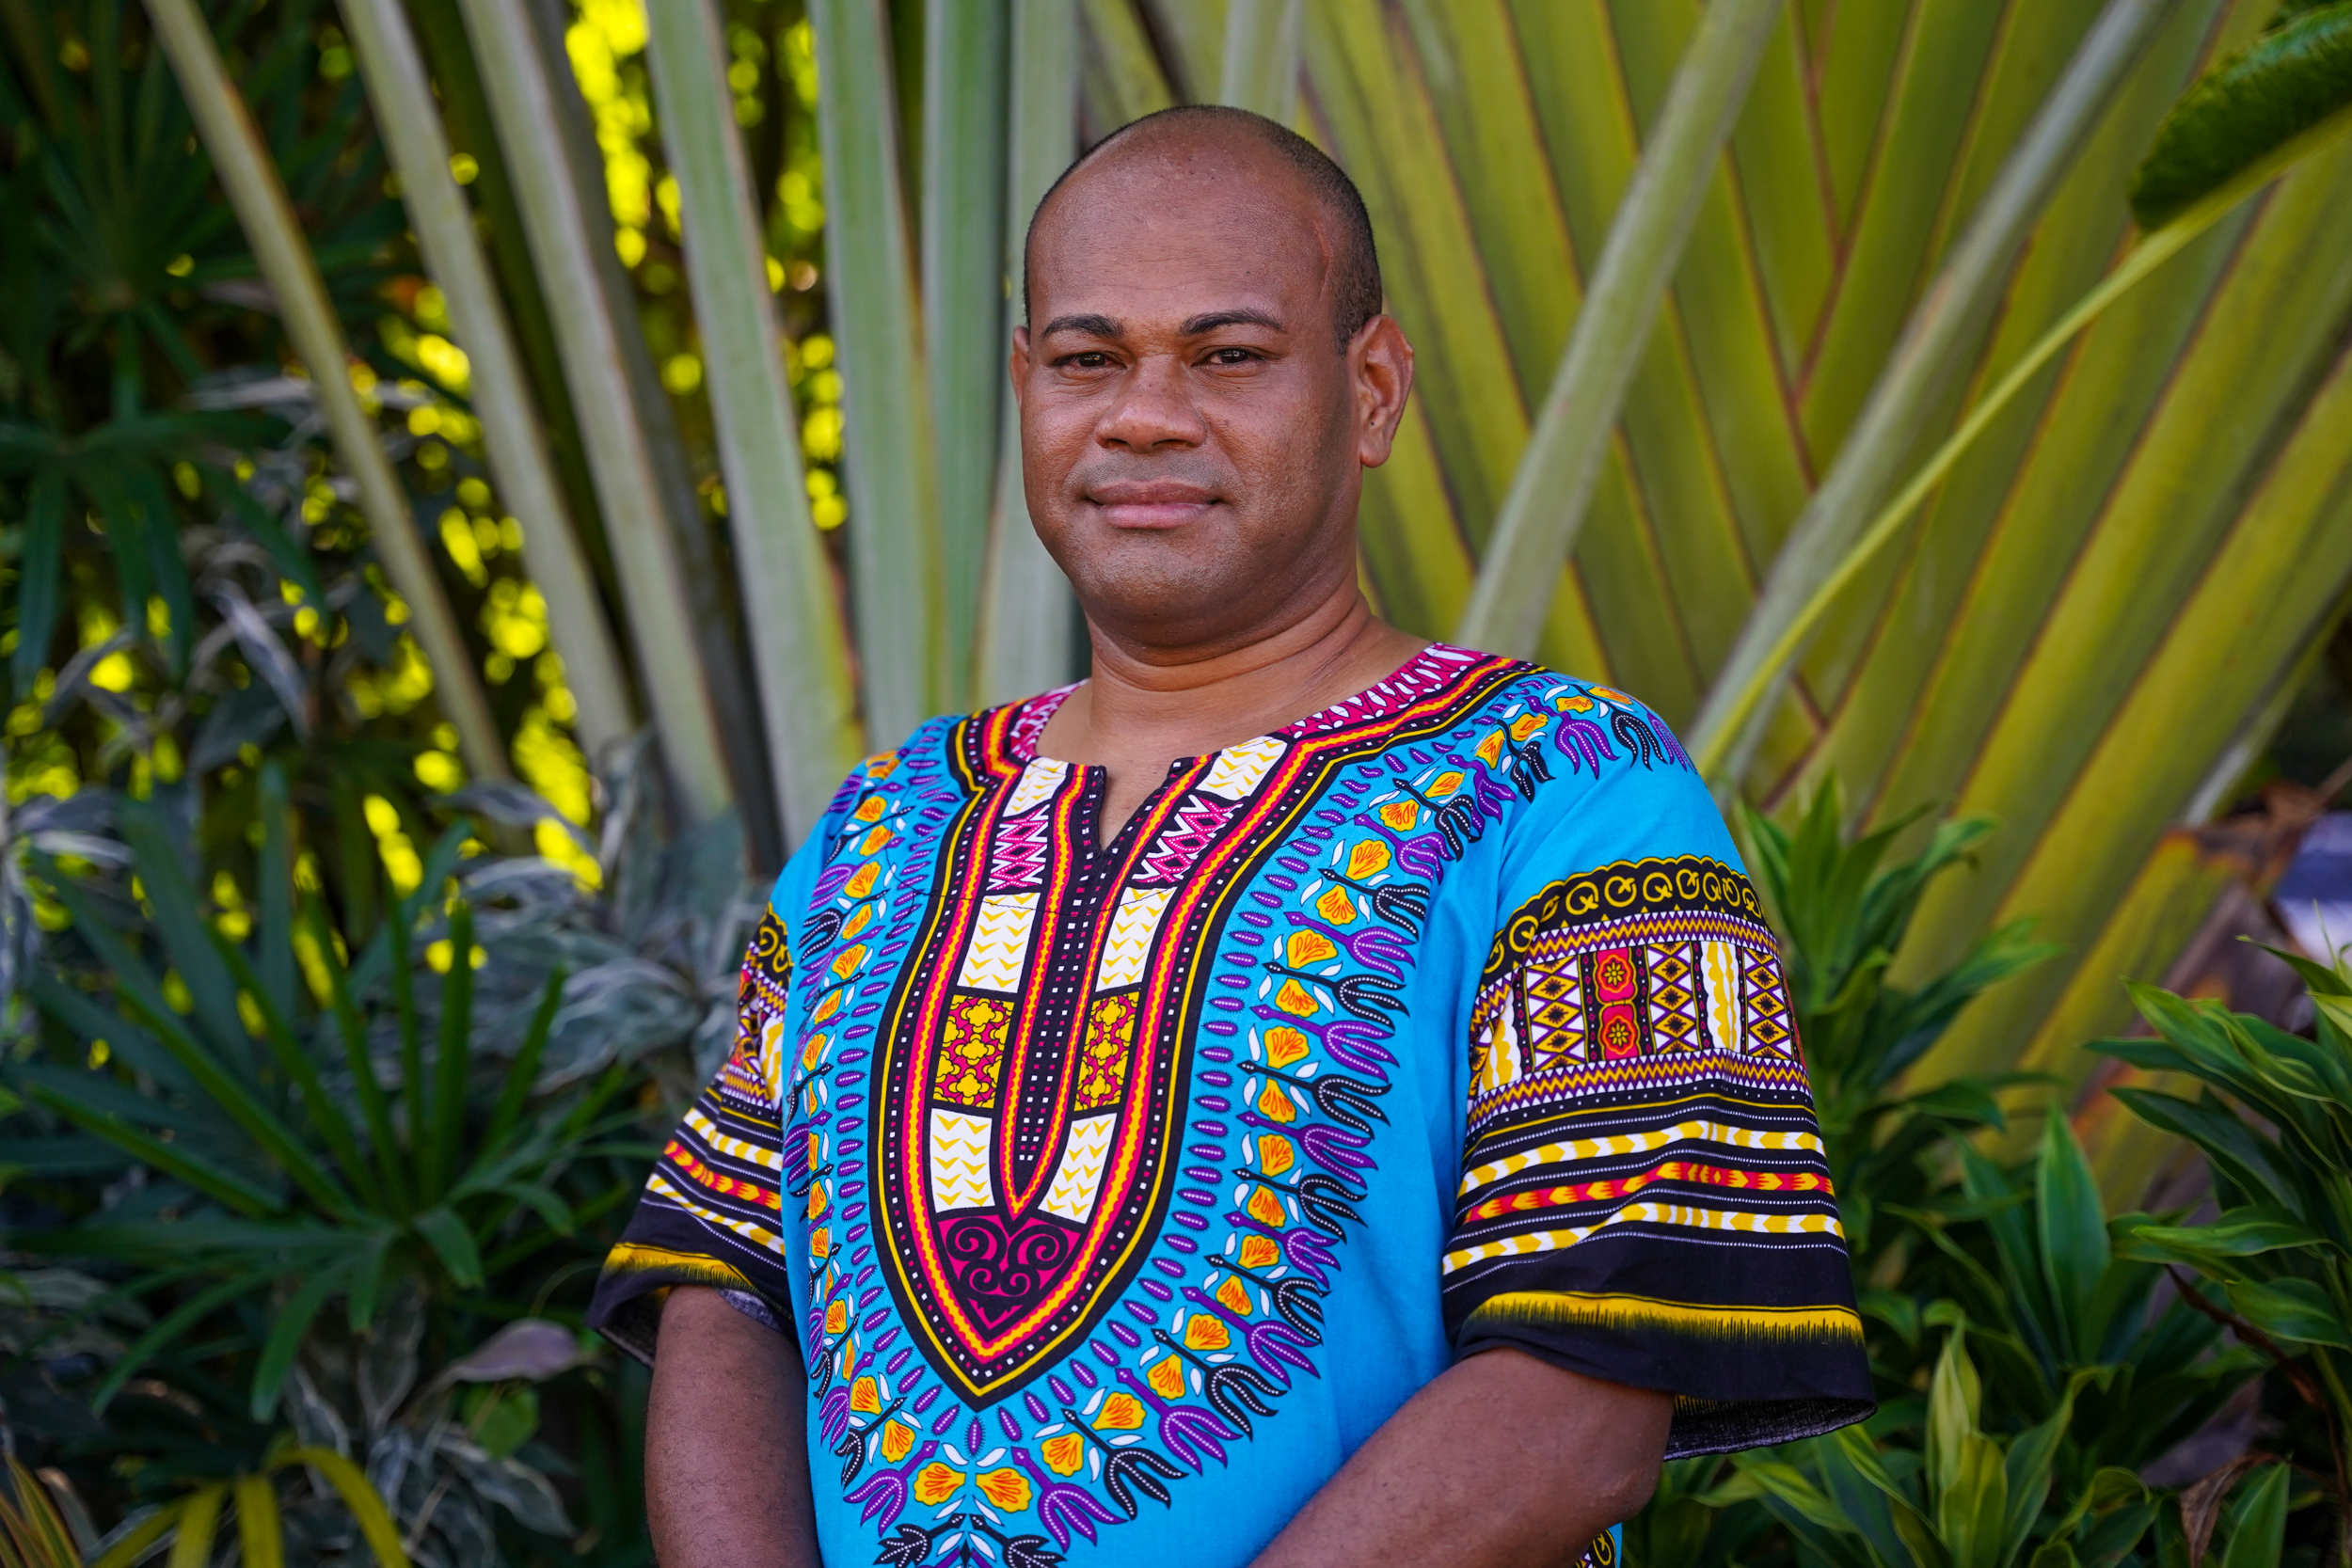 Isoa Nabainivalu stands outside and looks straight at the camera. A palm tree is behind him. He is wearing a traditional Fijian tunic shirt.